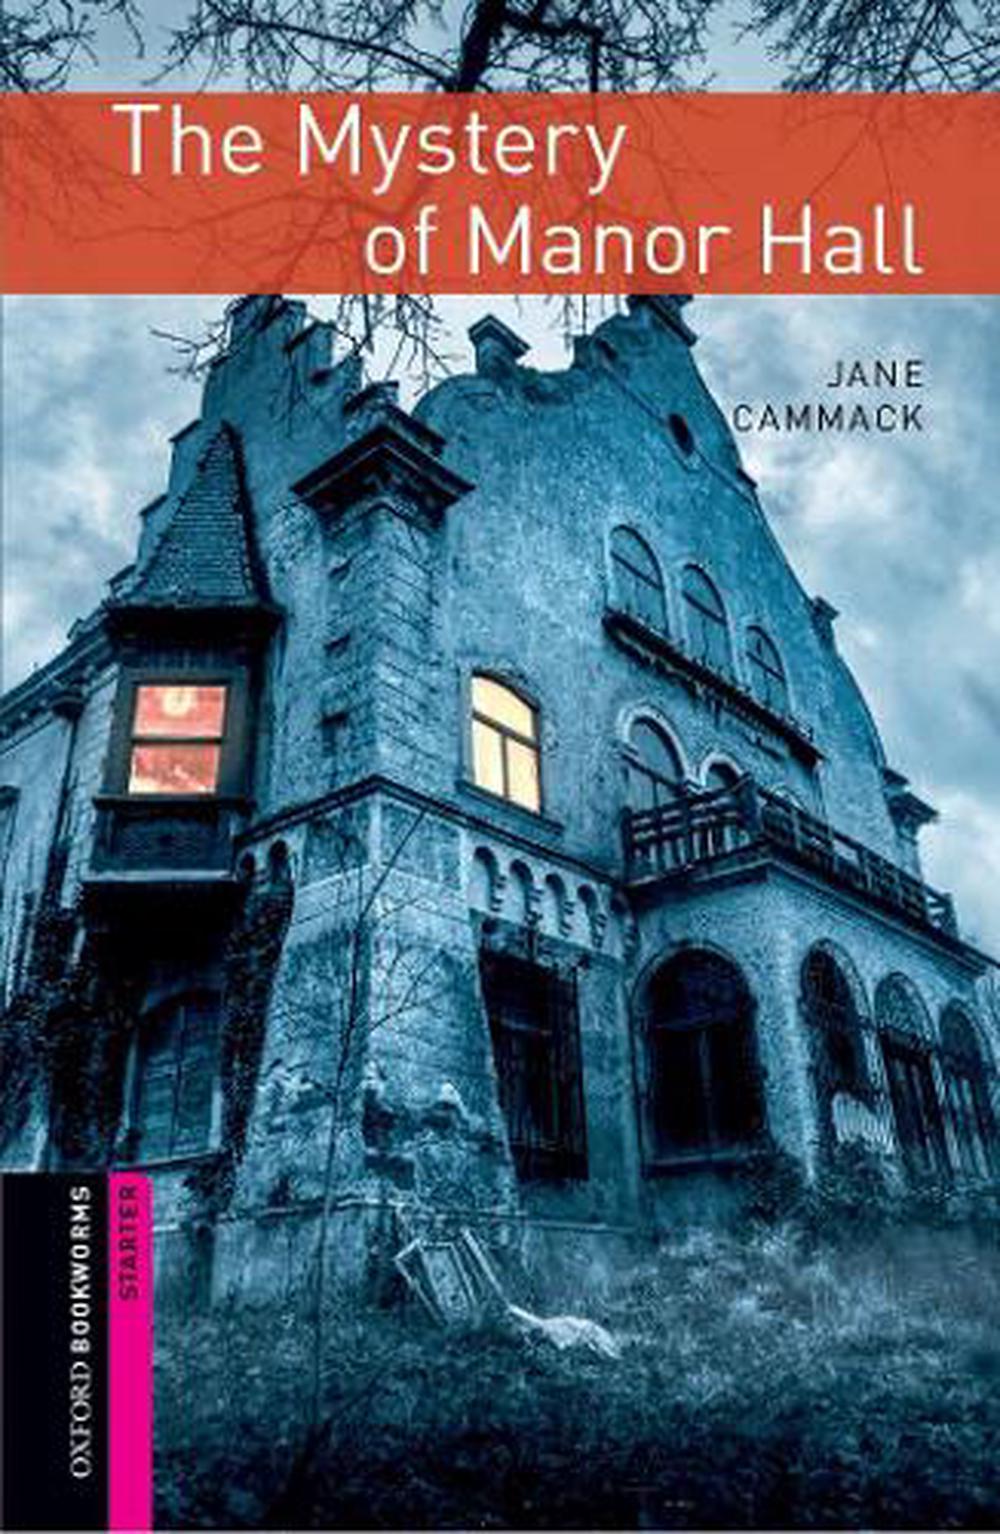 by　Manor　Oxford　Bookworms　Level::　Library:　Hall　The　9780194785990　The　Starter　Mystery　Cammack,　online　of　Jane　at　Paperback,　Buy　Nile